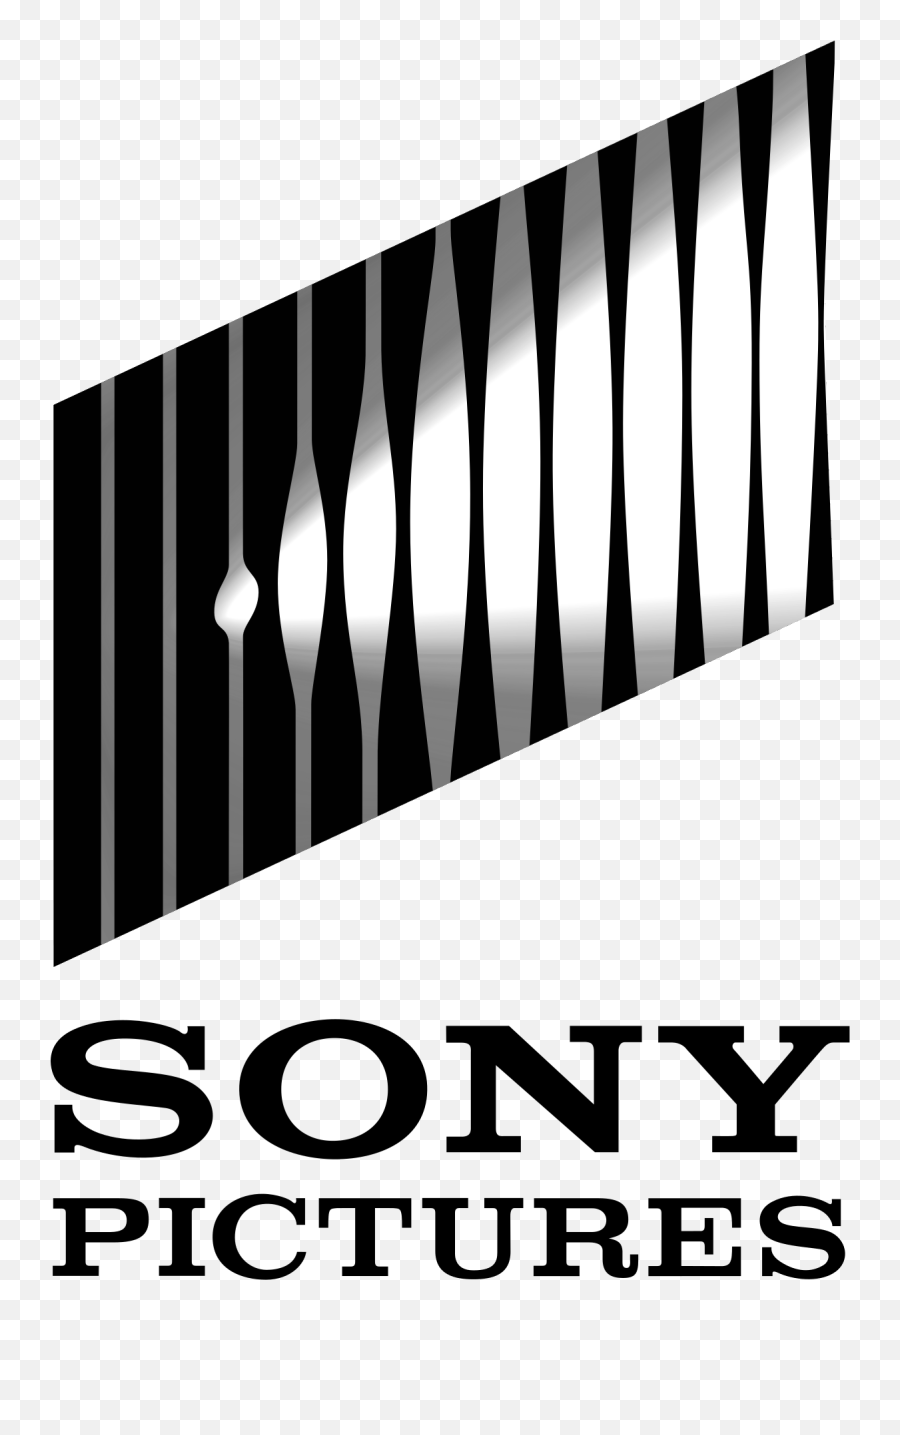 I Am A Voter - Sony Pictures Entertainment Logo 2021 Emoji,Emojis In Twitter Hatson